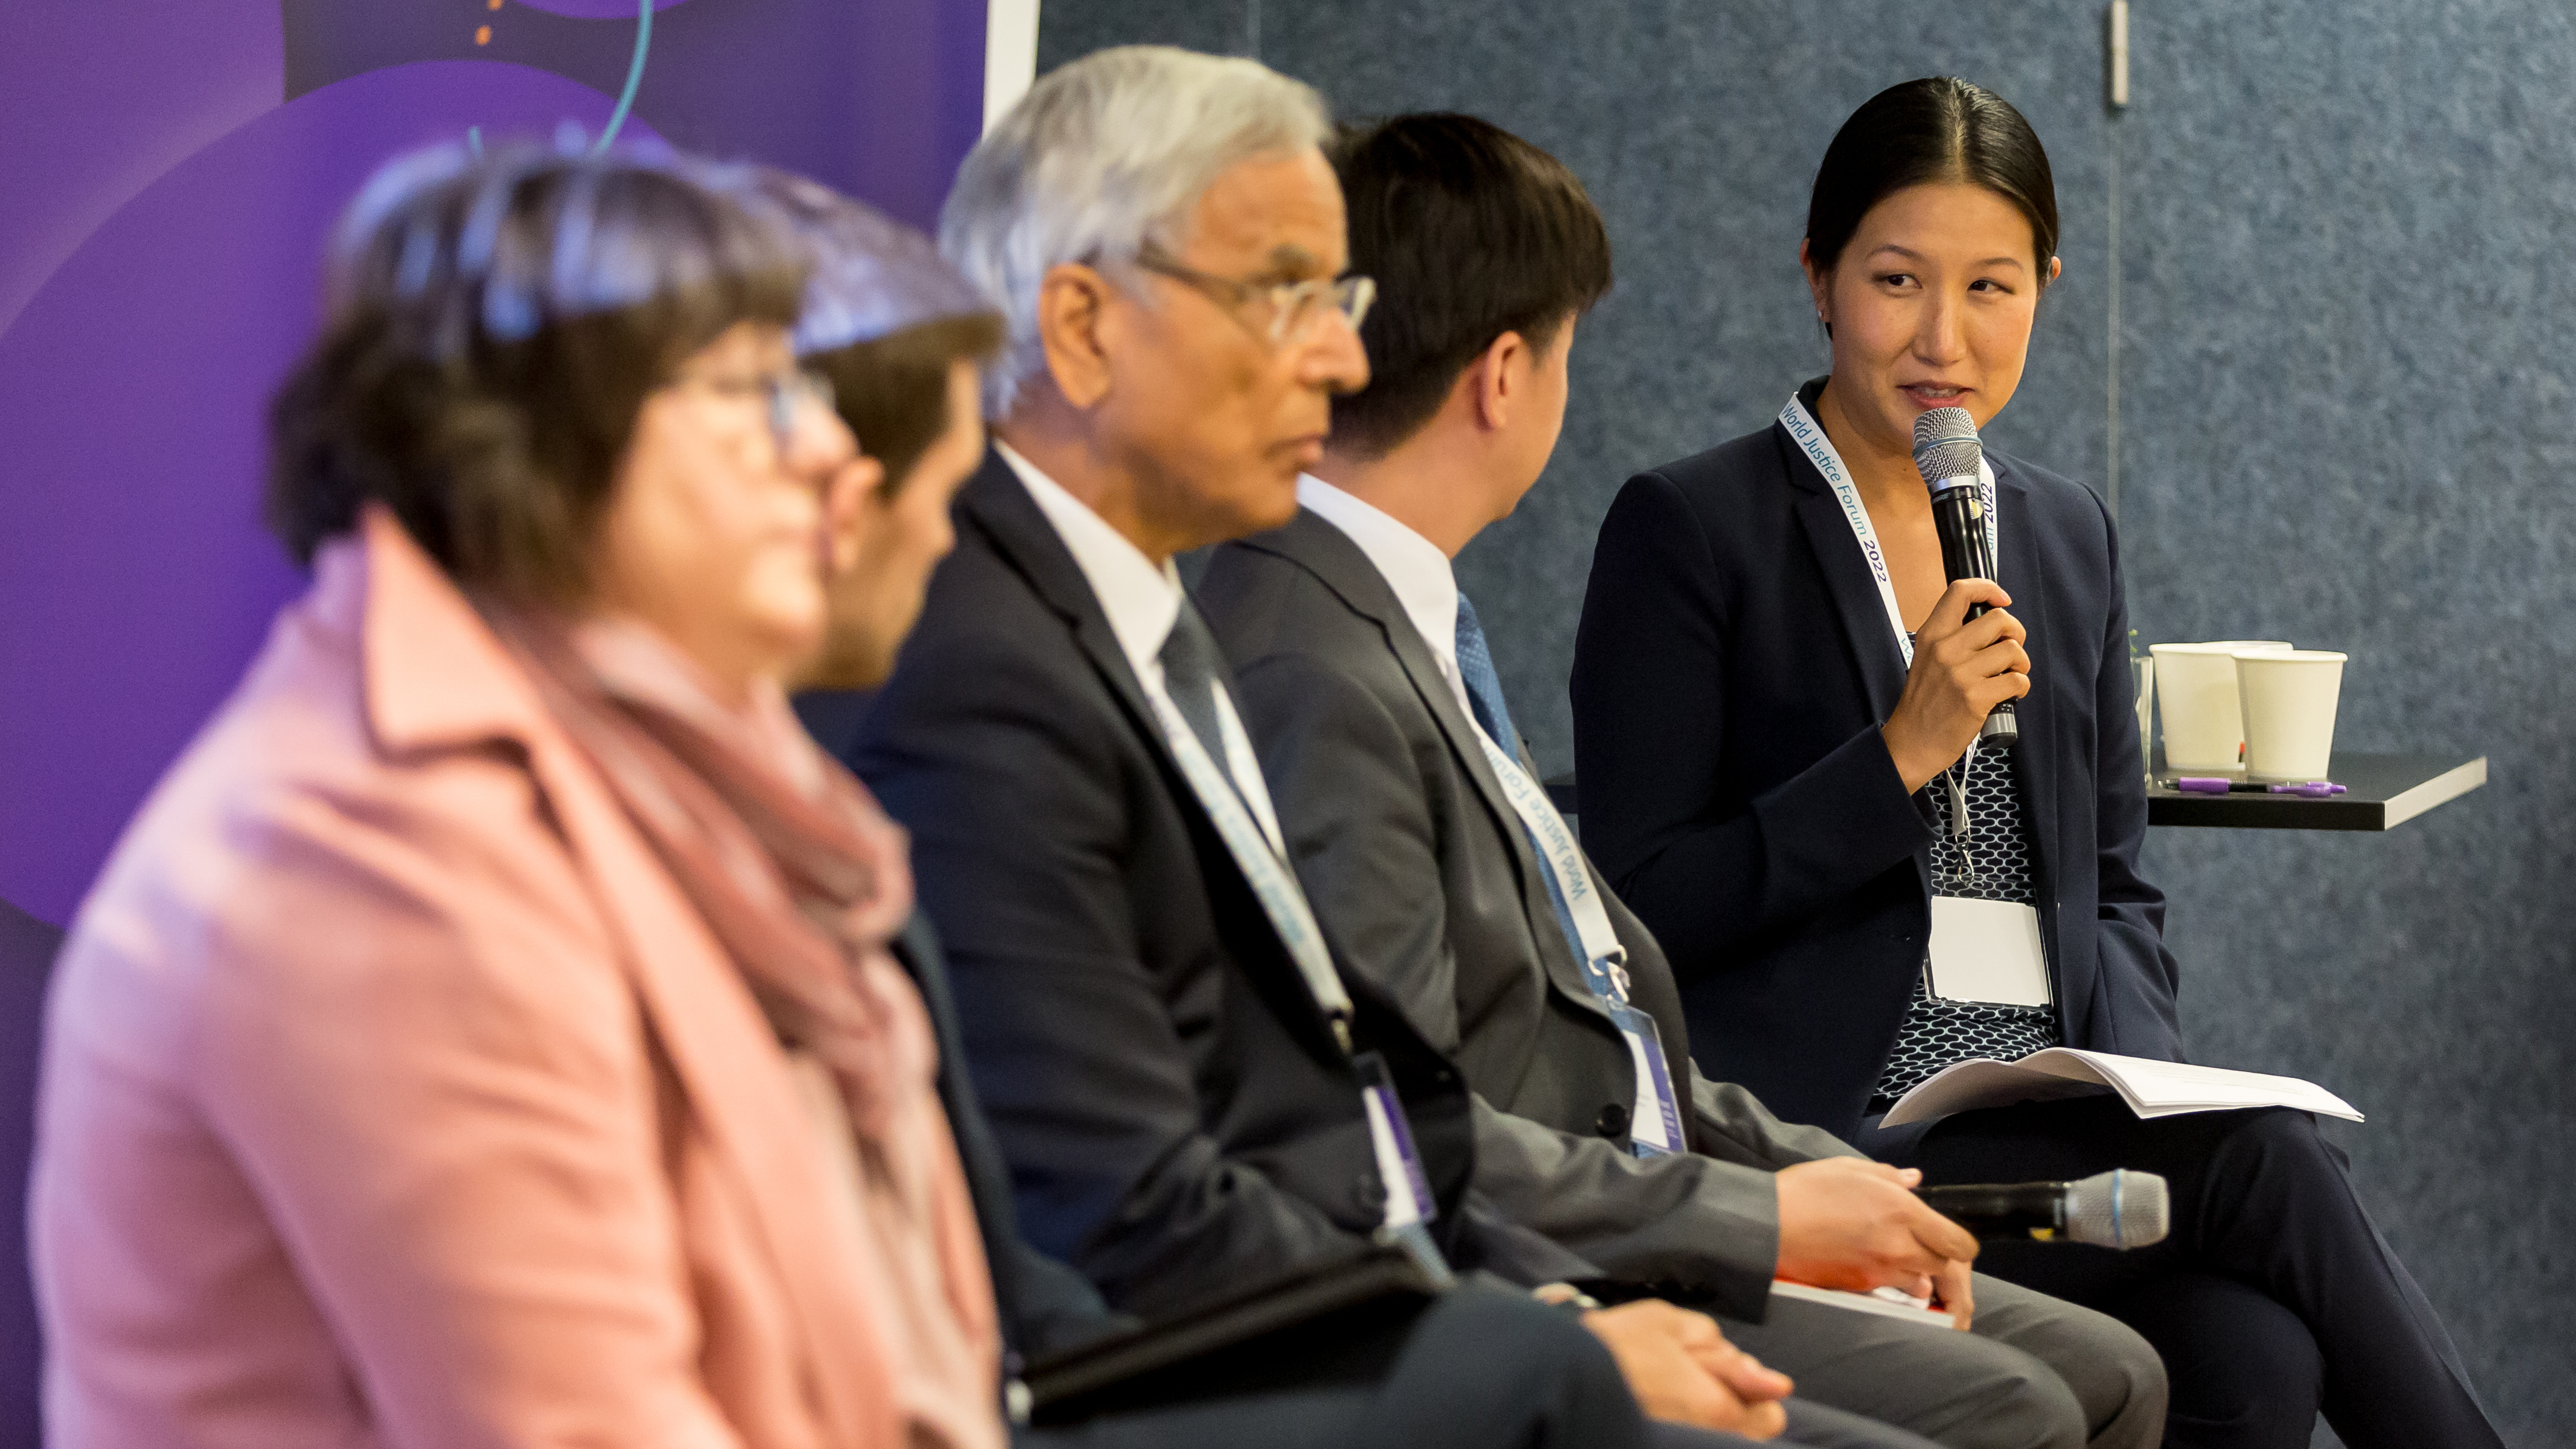 Leslie Tsai addresses the panel during the working session "Corruption Measurement as an Agent of Change" organized by the Chandler Foundation.